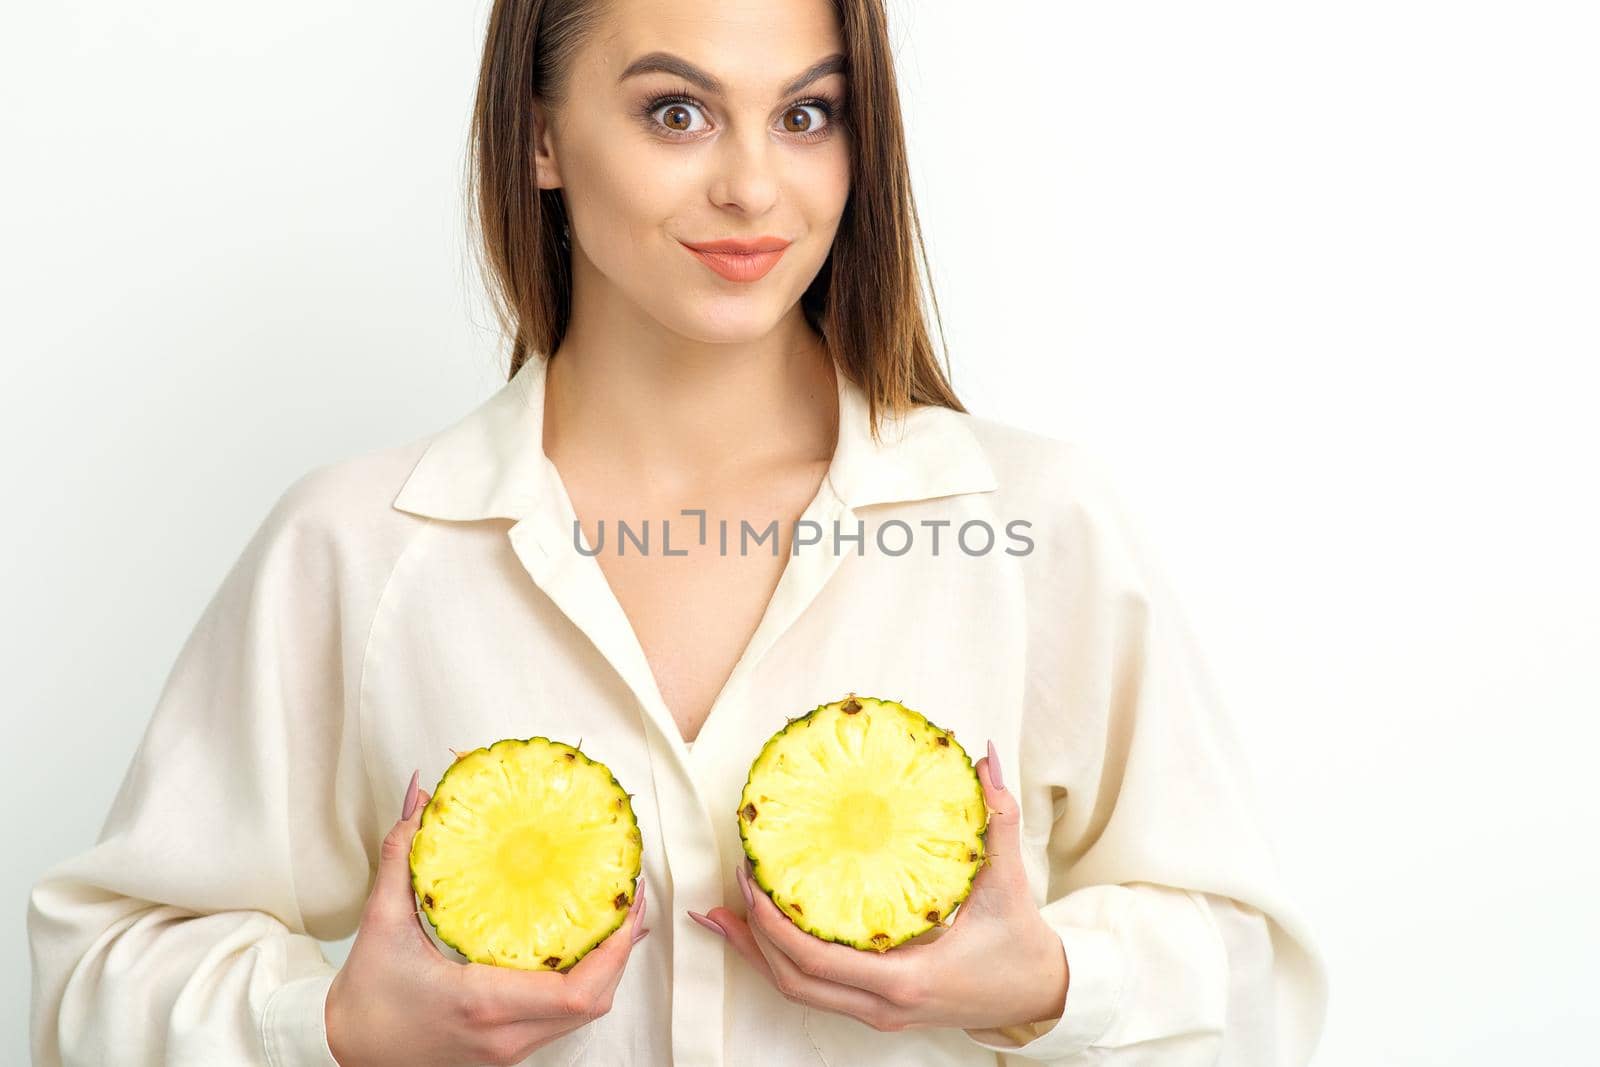 Young Caucasian smiling woman holding slices pineapple over white background, breast health concept